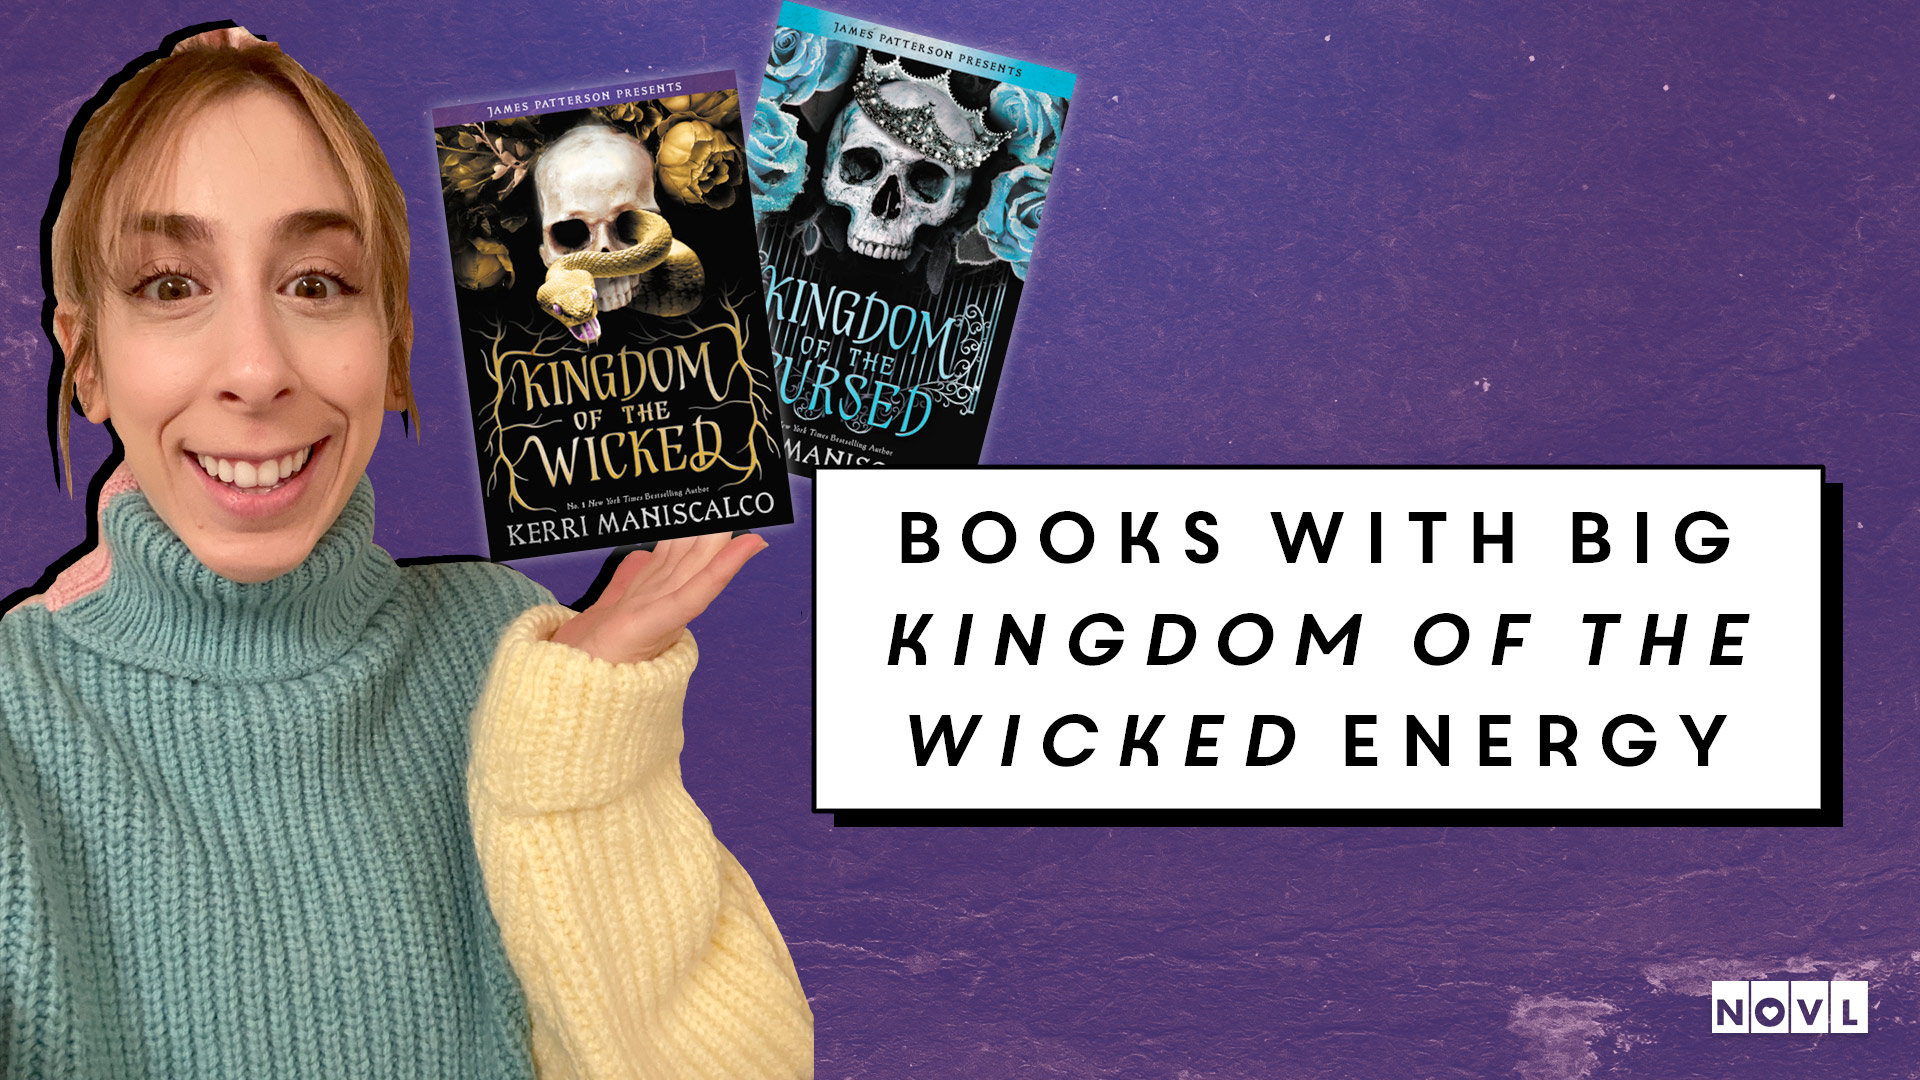 The NOVL Blog, Featured Image for Article: Books with Big Kingdom of the Wicked Energy